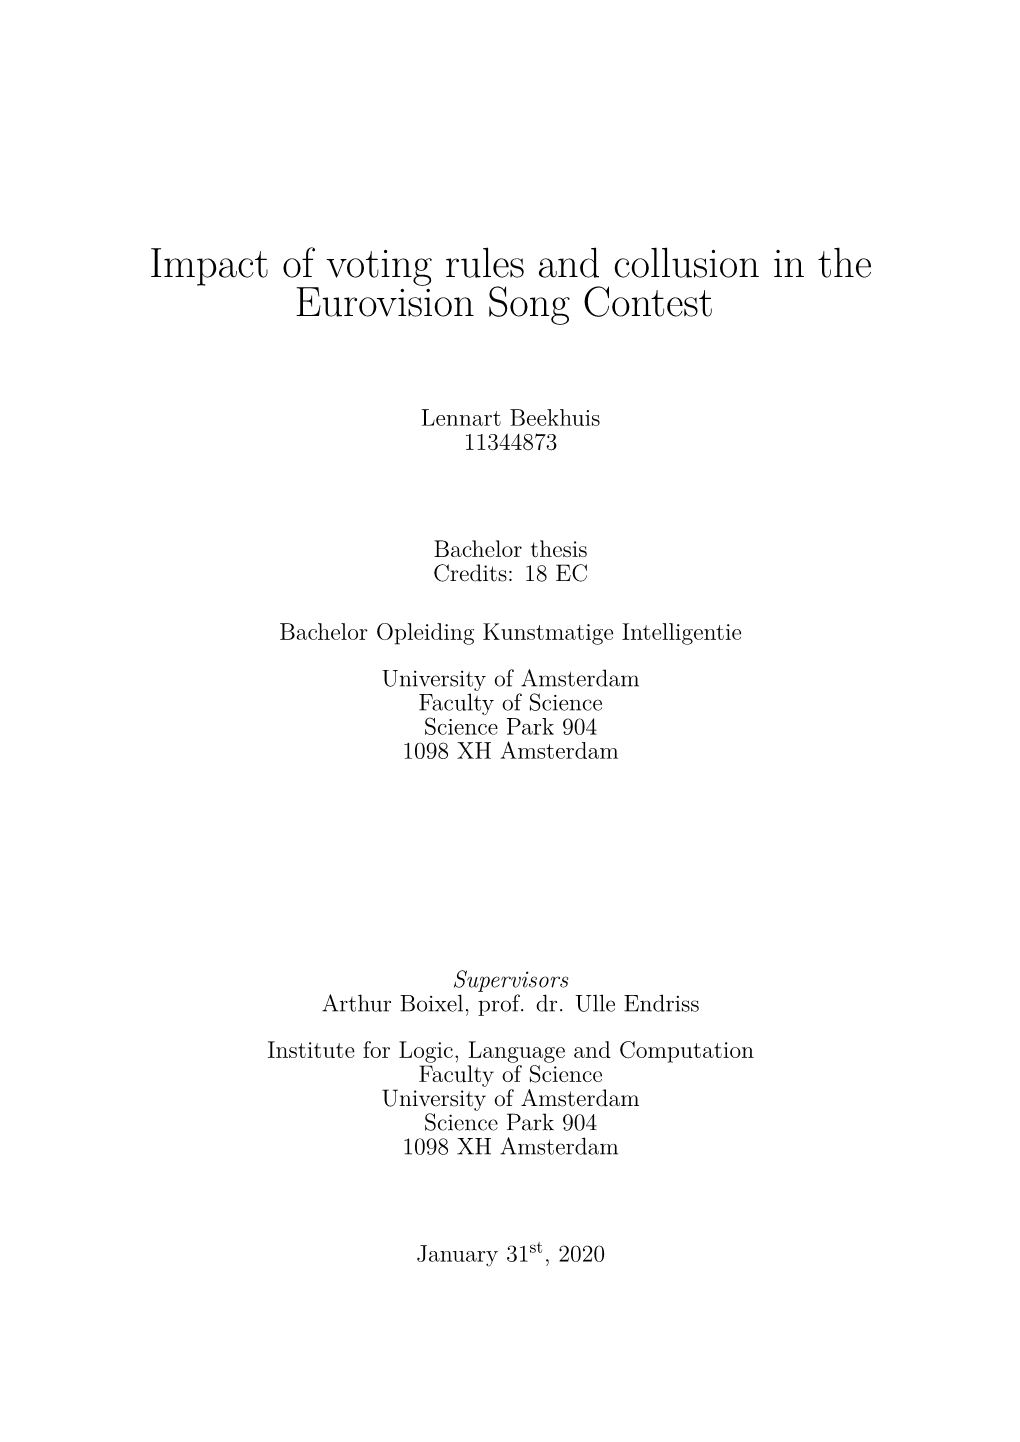 Impact of Voting Rules and Collusion in the Eurovision Song Contest